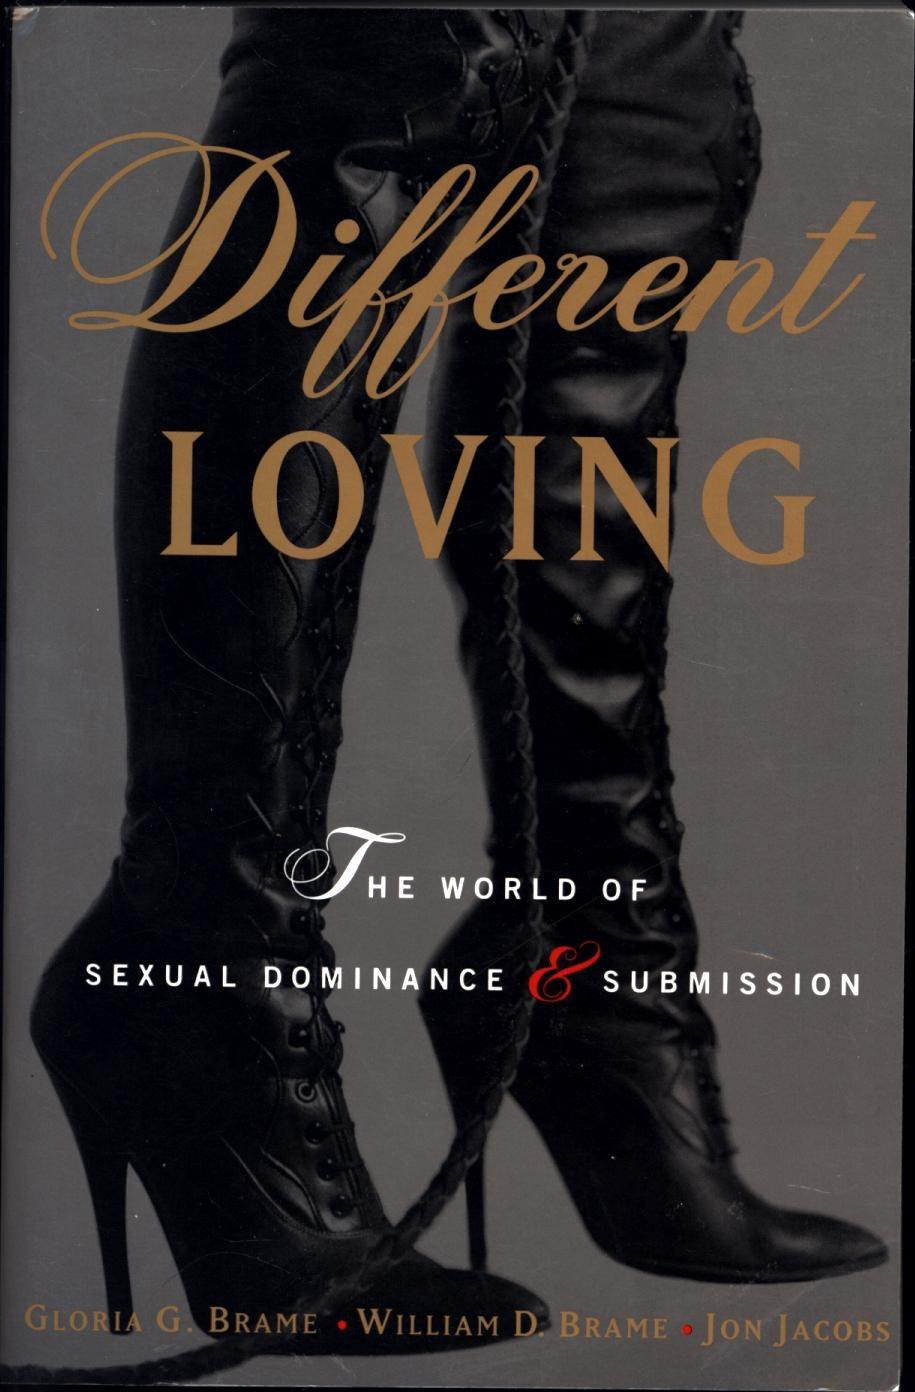 Different Loving / The World of Sexual Dominance & Submission - Brame, Gloria G., William D. Brame, and Jon Jacobs